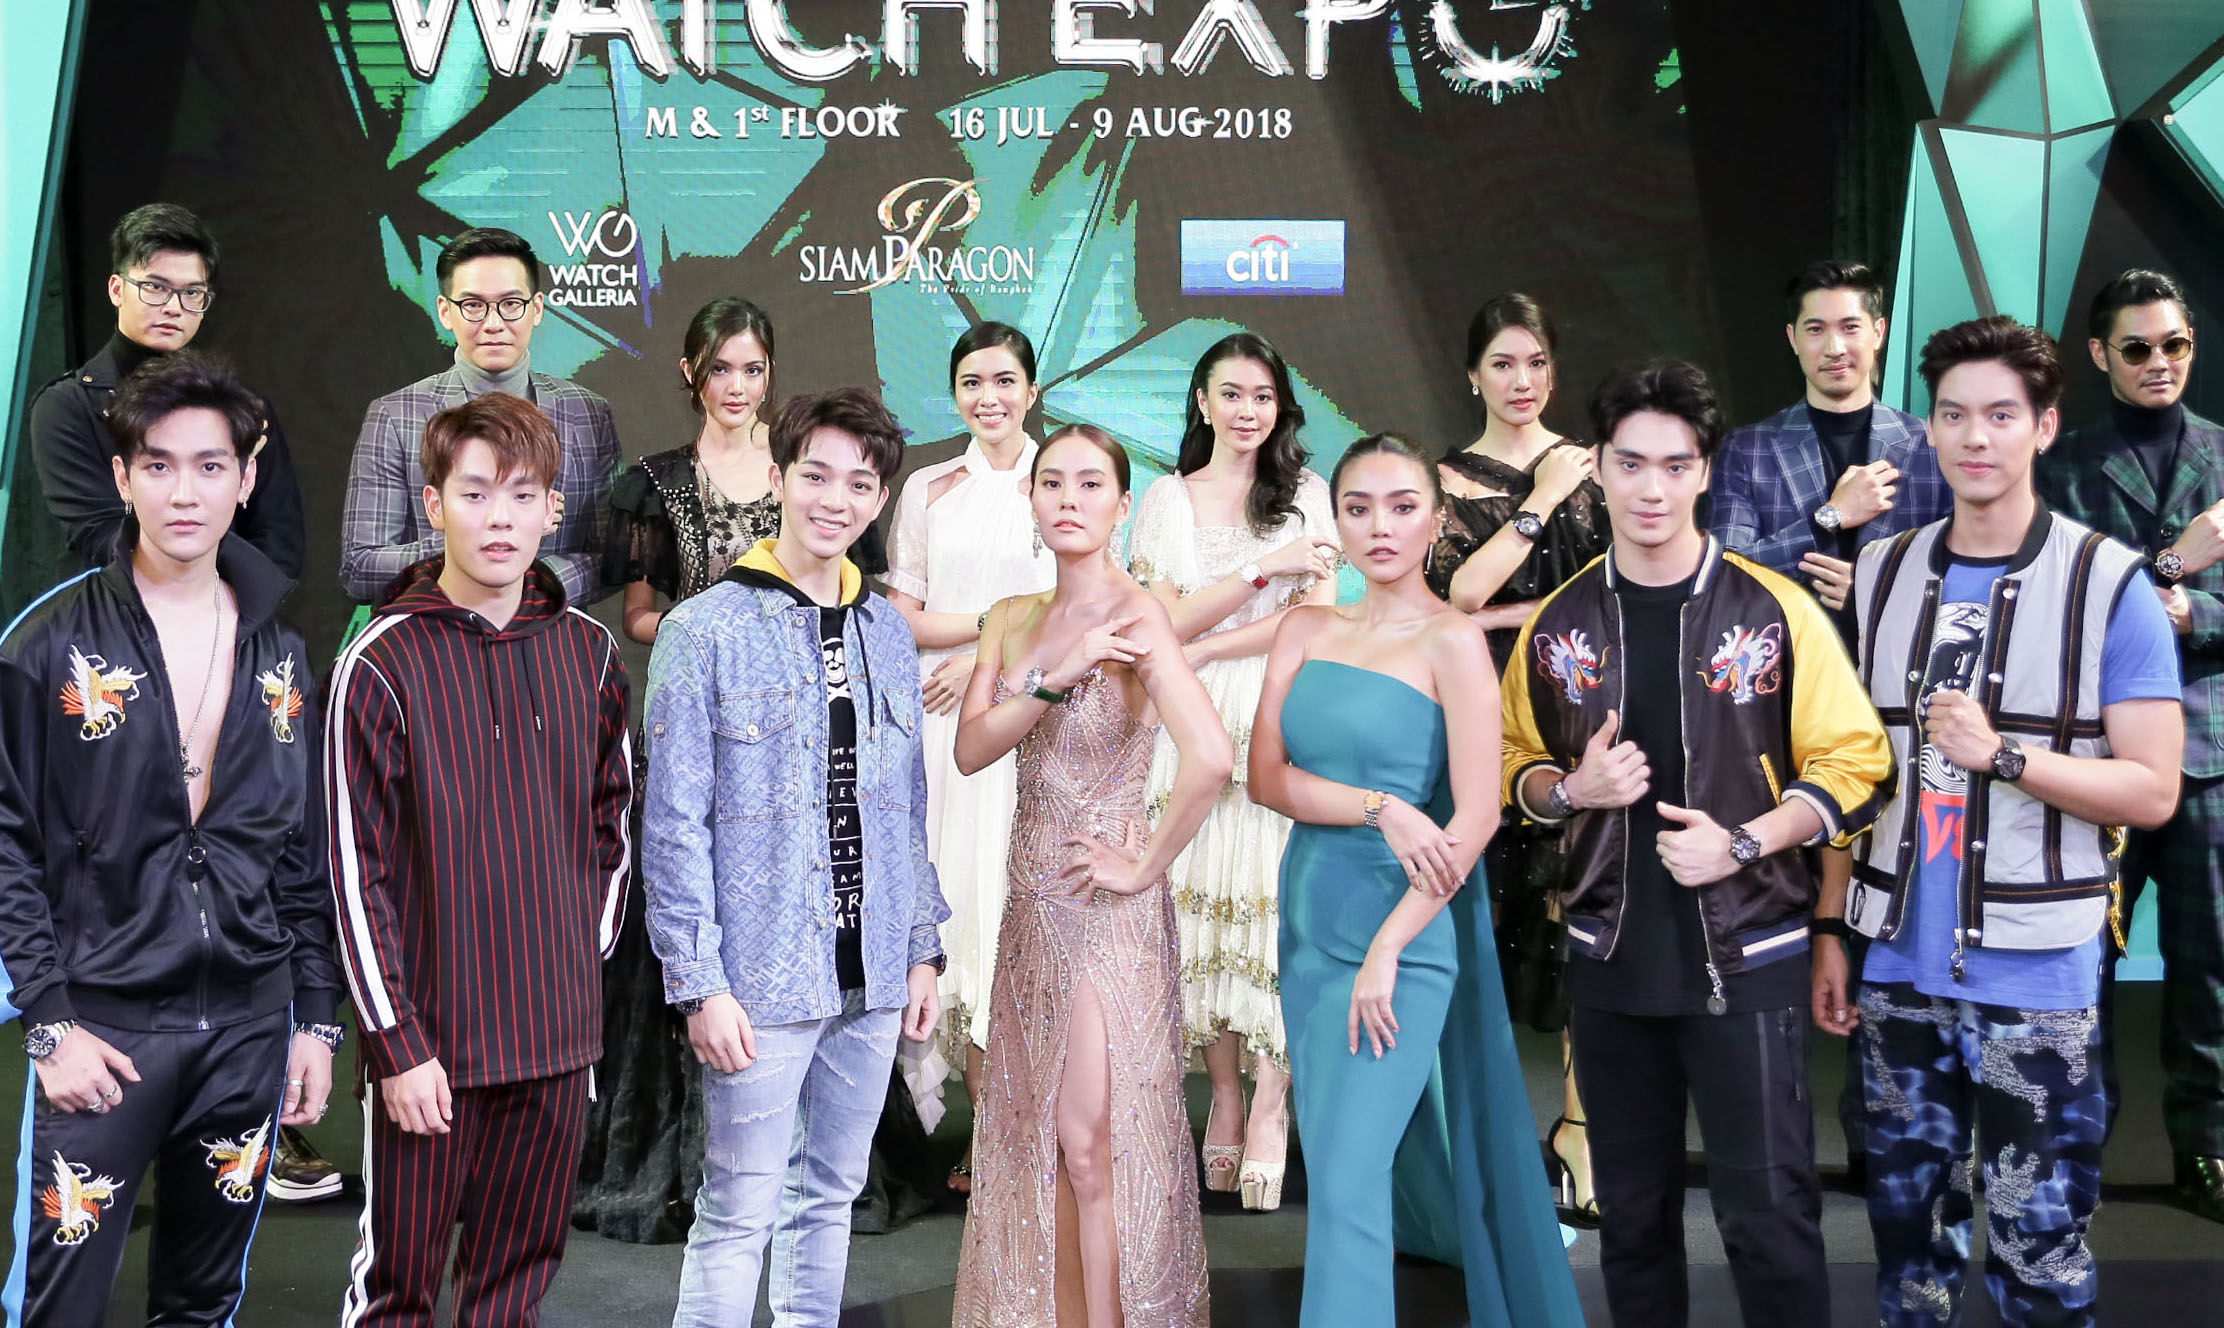 Siam Paragon Watch Expo 2018 opens with an exclusive celebrity showcase